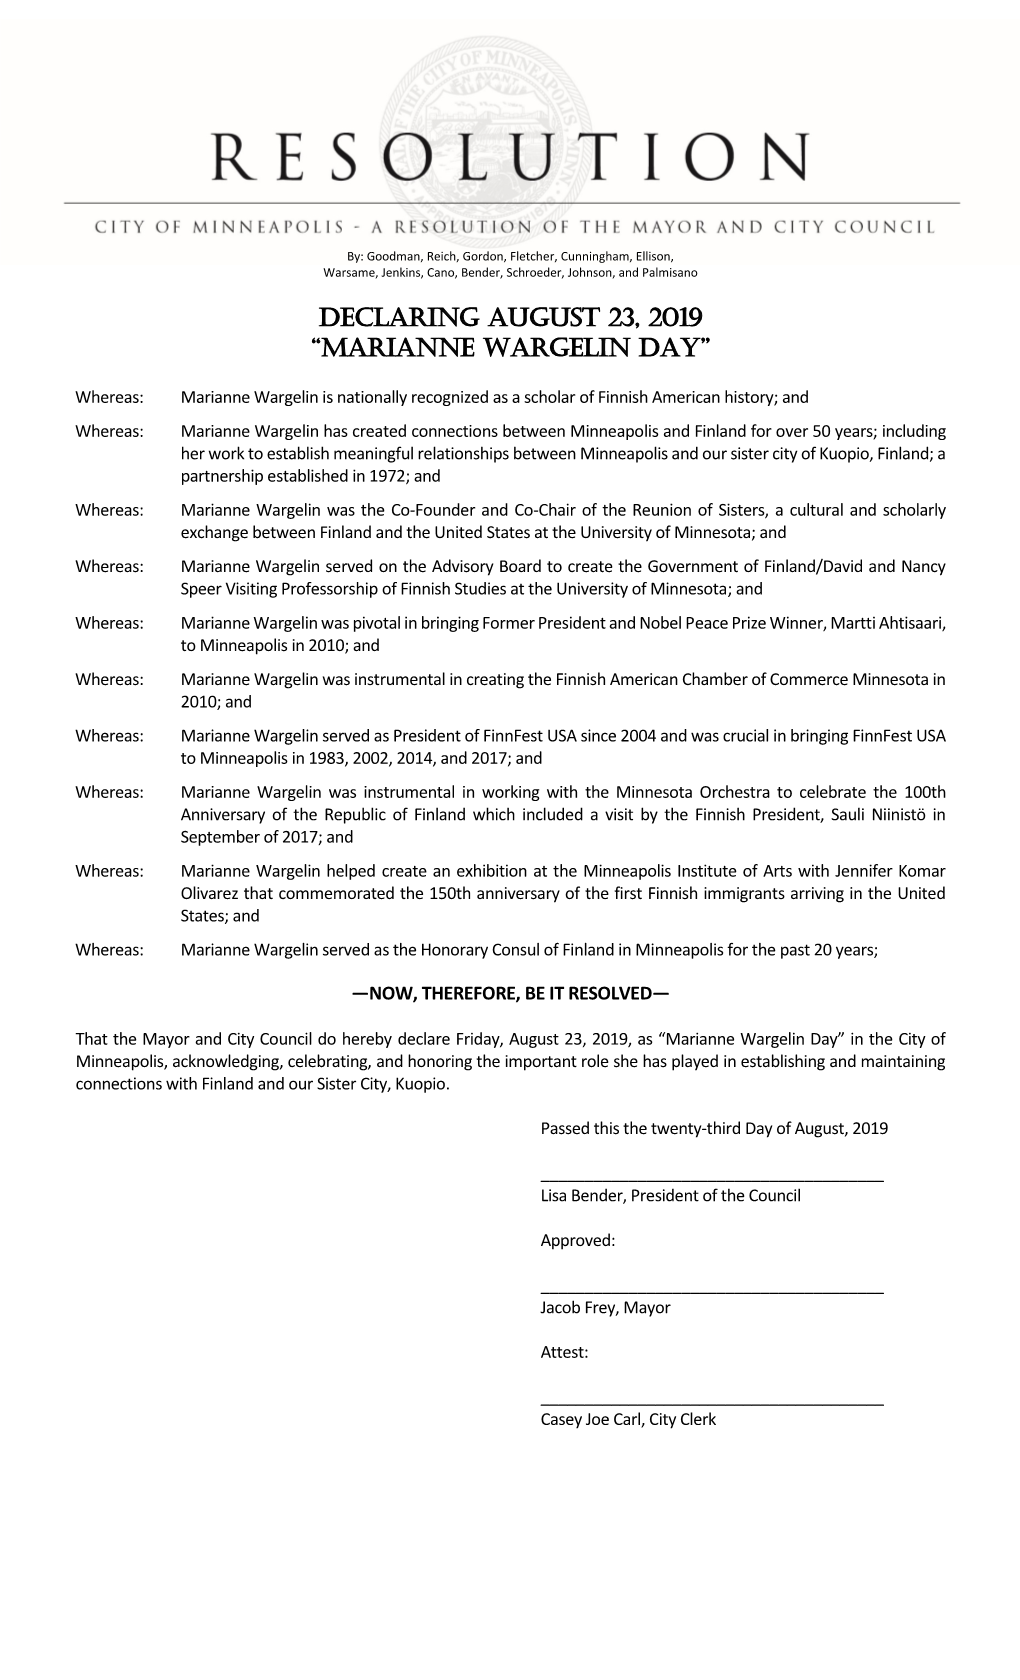 Marianne Wargeline Day Honorary